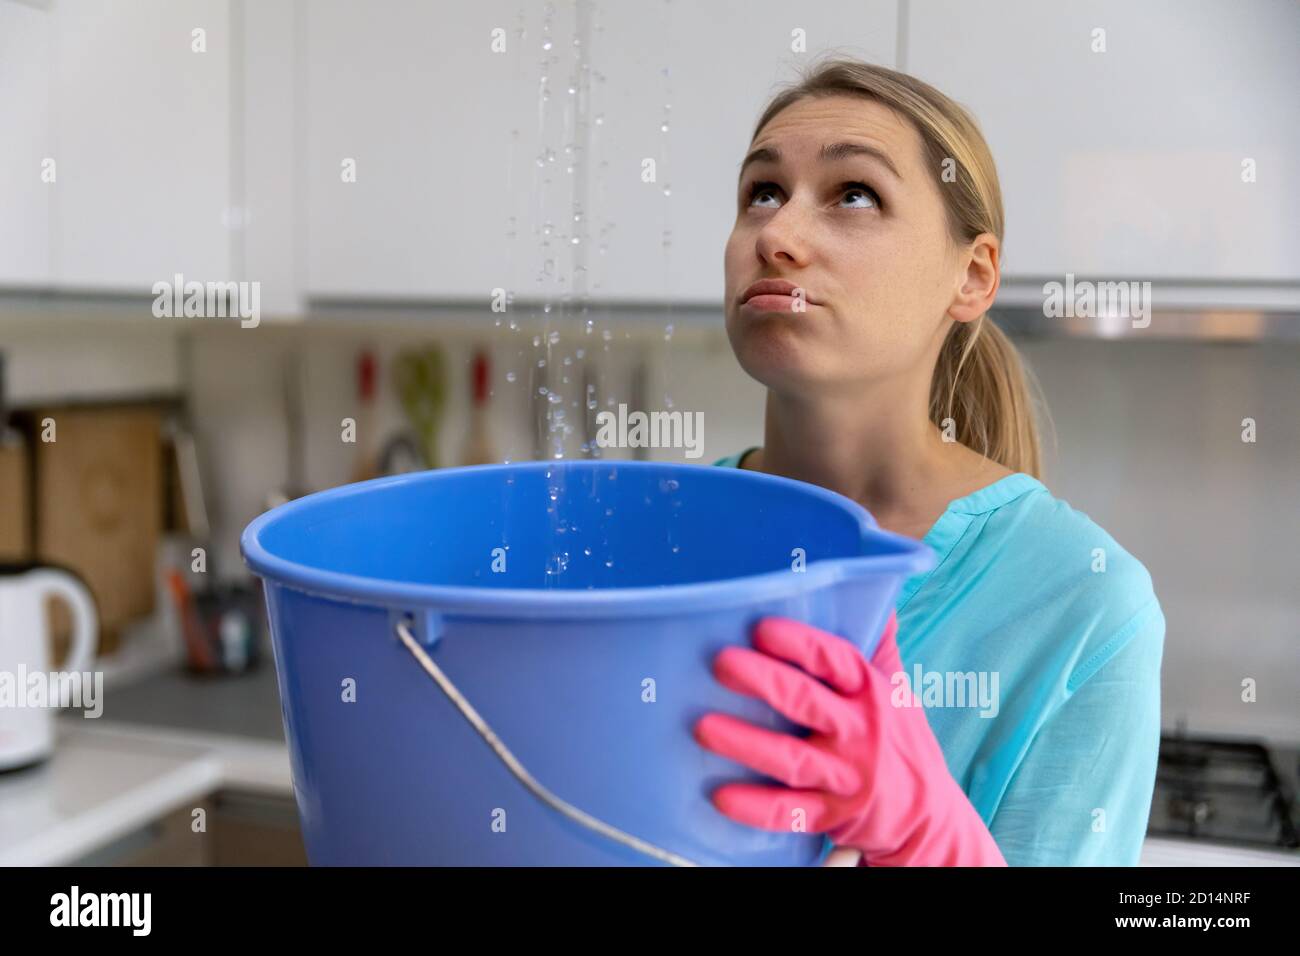 home flooded by upstairs or roof damage - woman holding bucket while water leaking from ceiling in kitchen Stock Photo